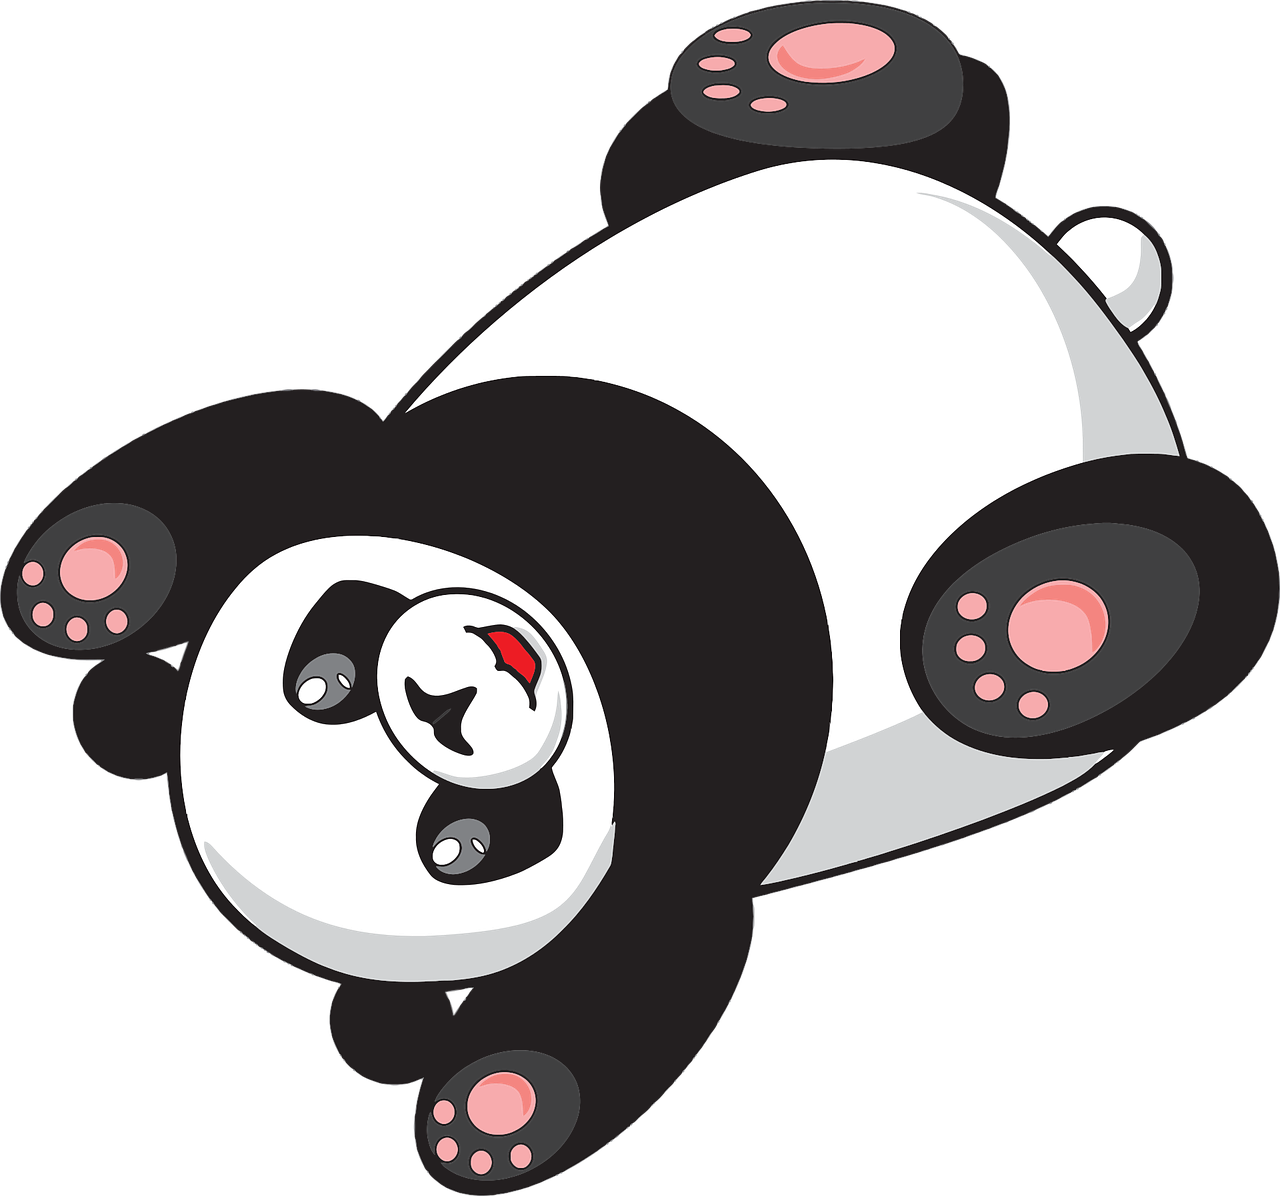 a panda bear laying down on its back, a digital rendering, inspired by Shūbun Tenshō, pixabay, mingei, isometric top down left view, bouncy belly, istock, it's night time